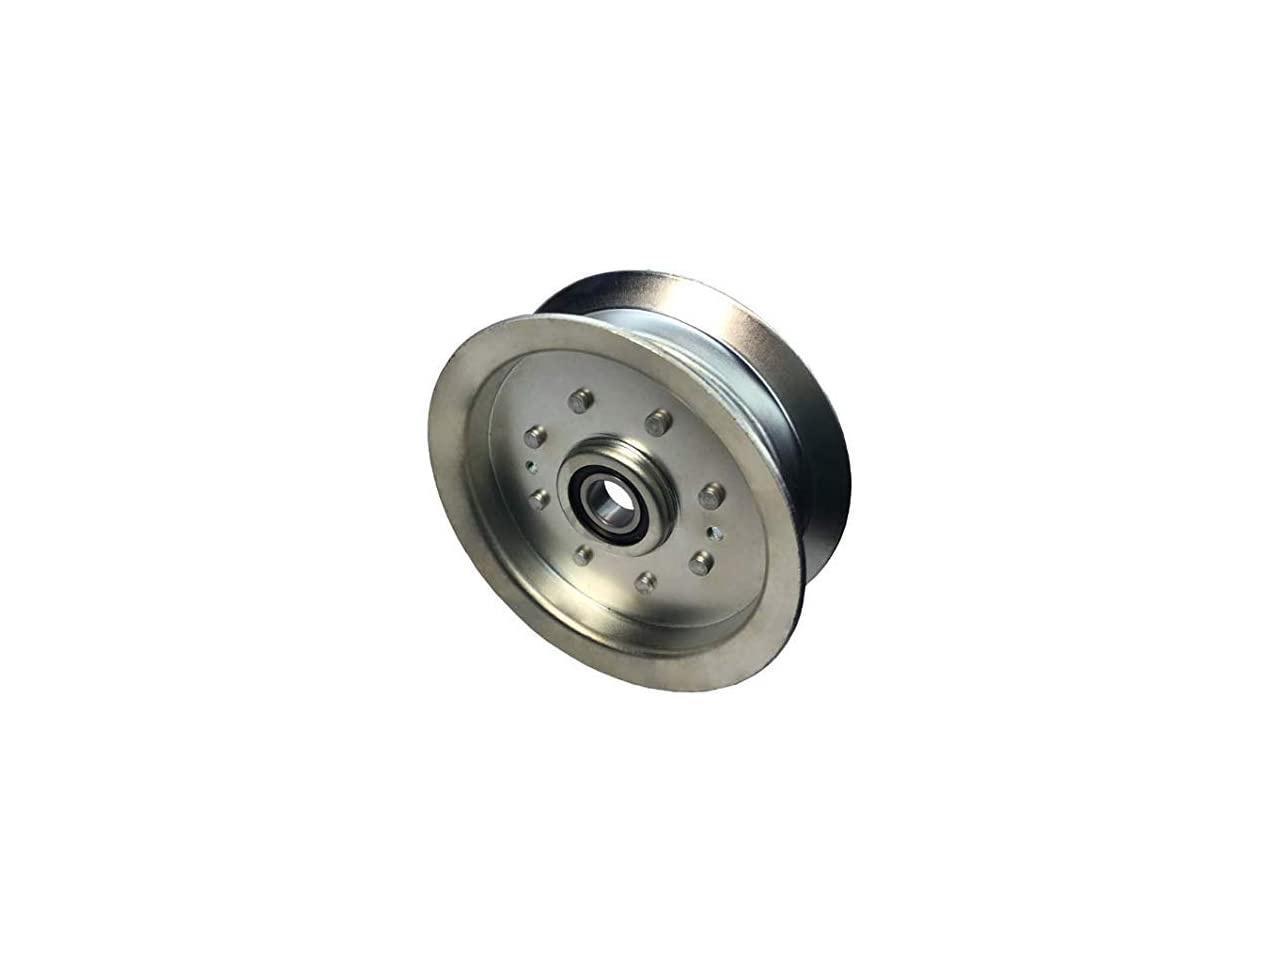 GY20629 GY22082 Flat Idler Pulley for Deck Fits John Deere SCOTTS L2048 L2548 